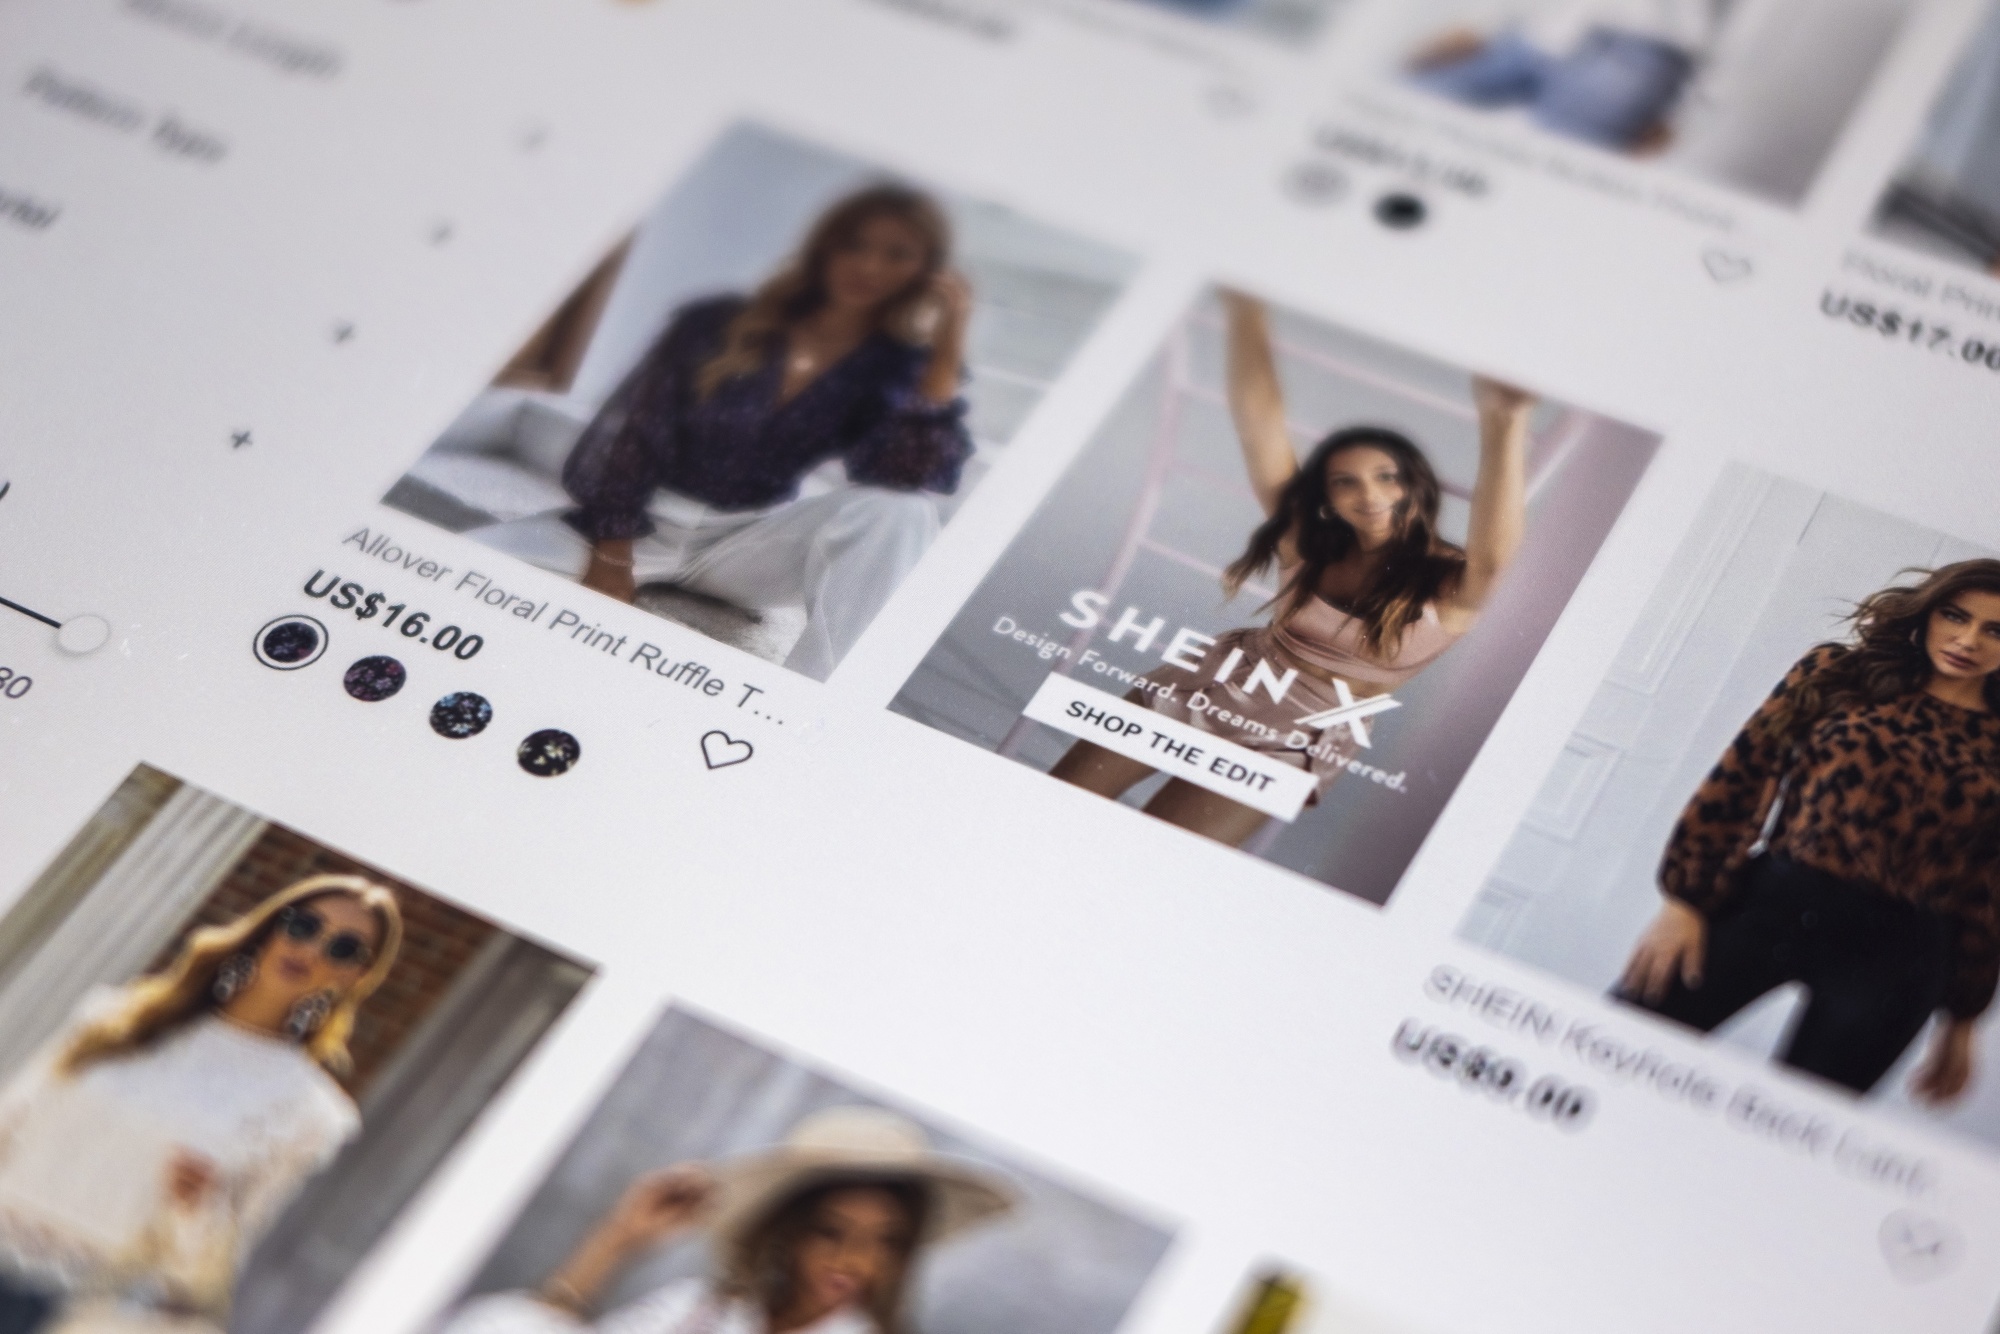 Fast fashion giants Shein and Boohoo both face new risks over